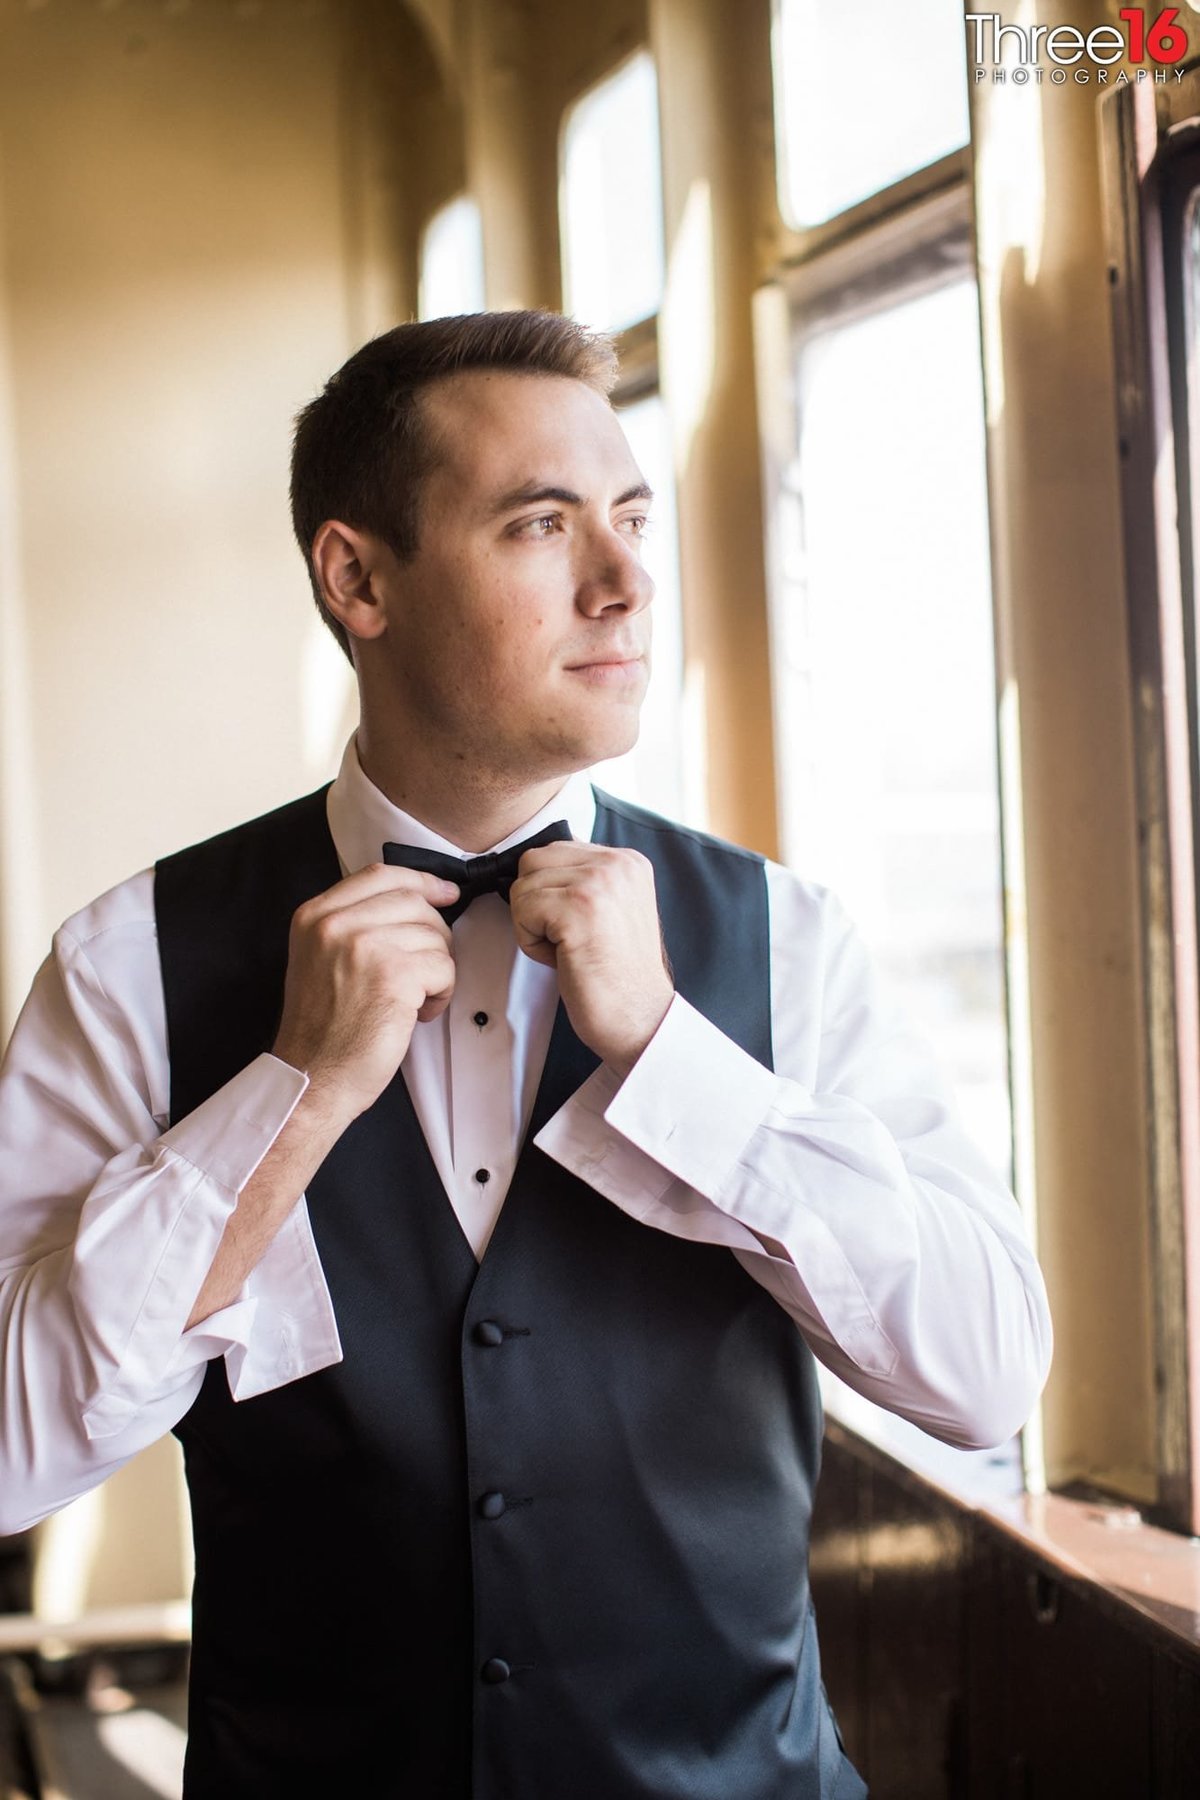 Groom straightening his bow tie before the ceremony